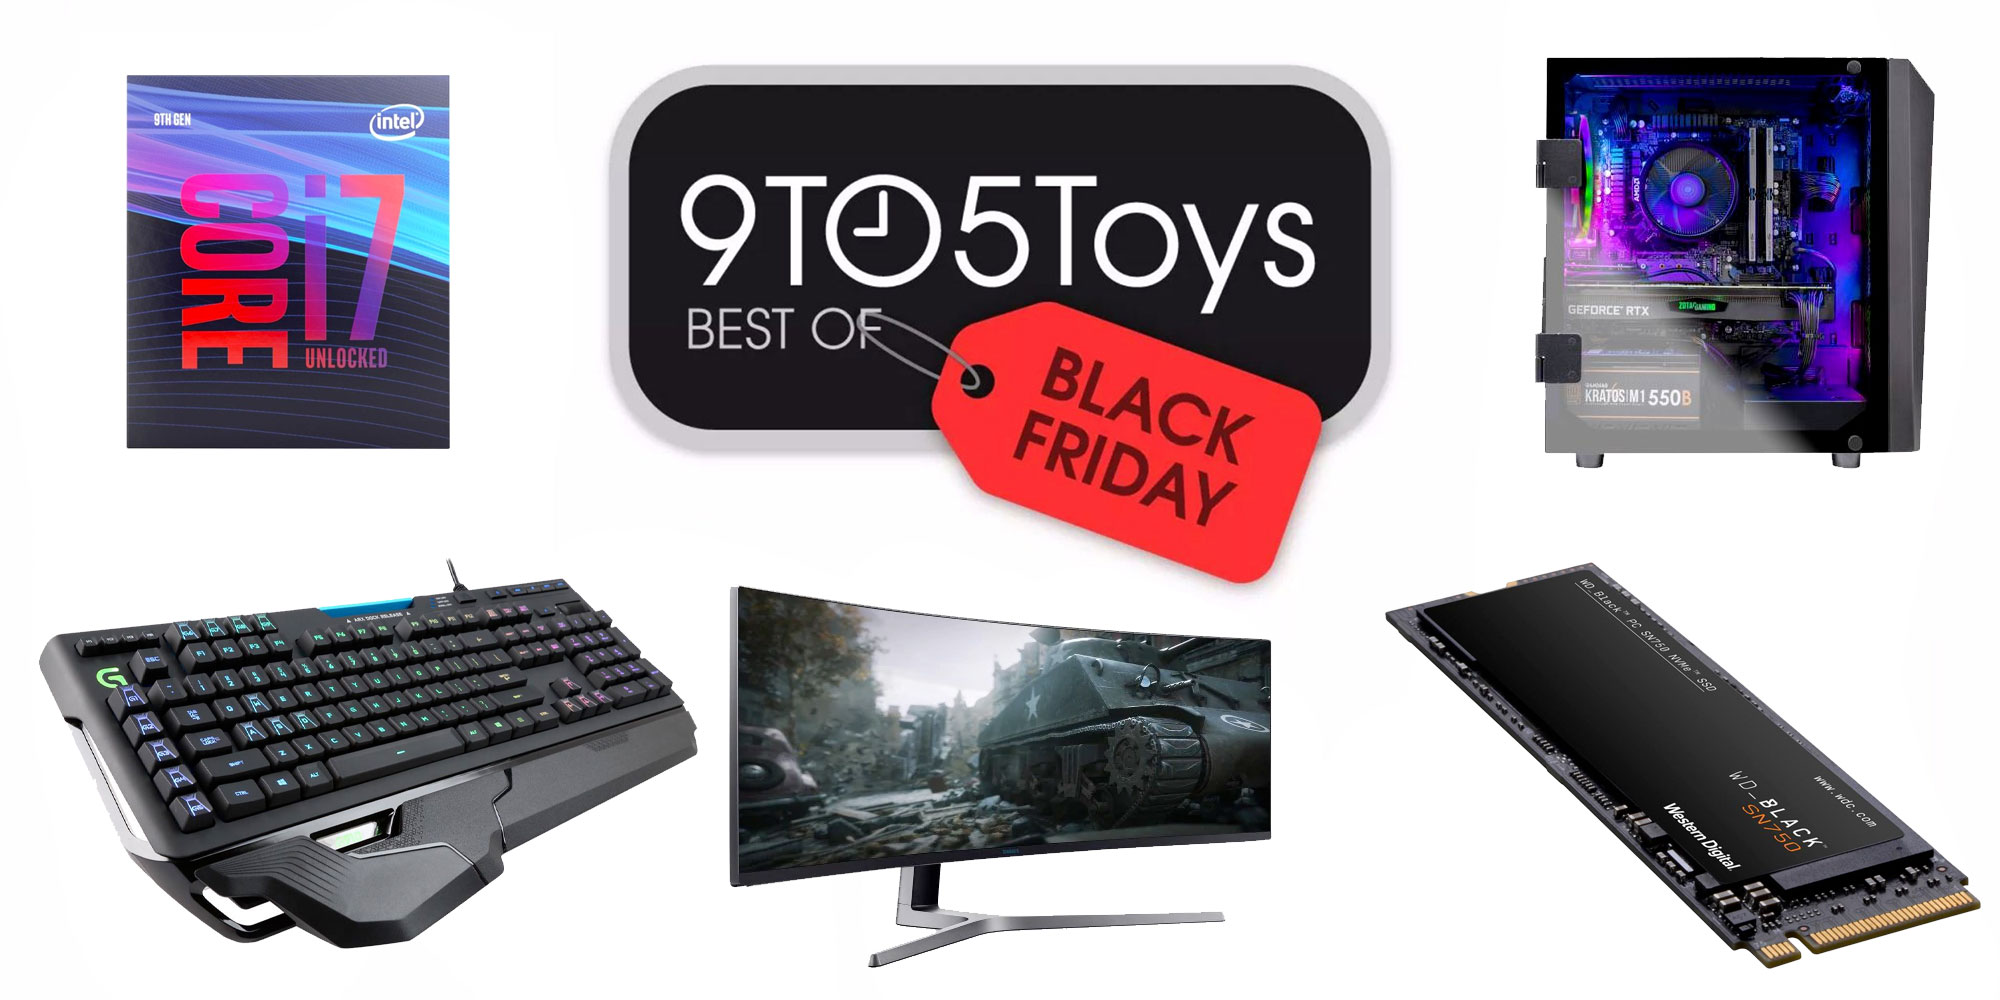 Black PC Gaming deals include CPUs, monitors, 9to5Toys